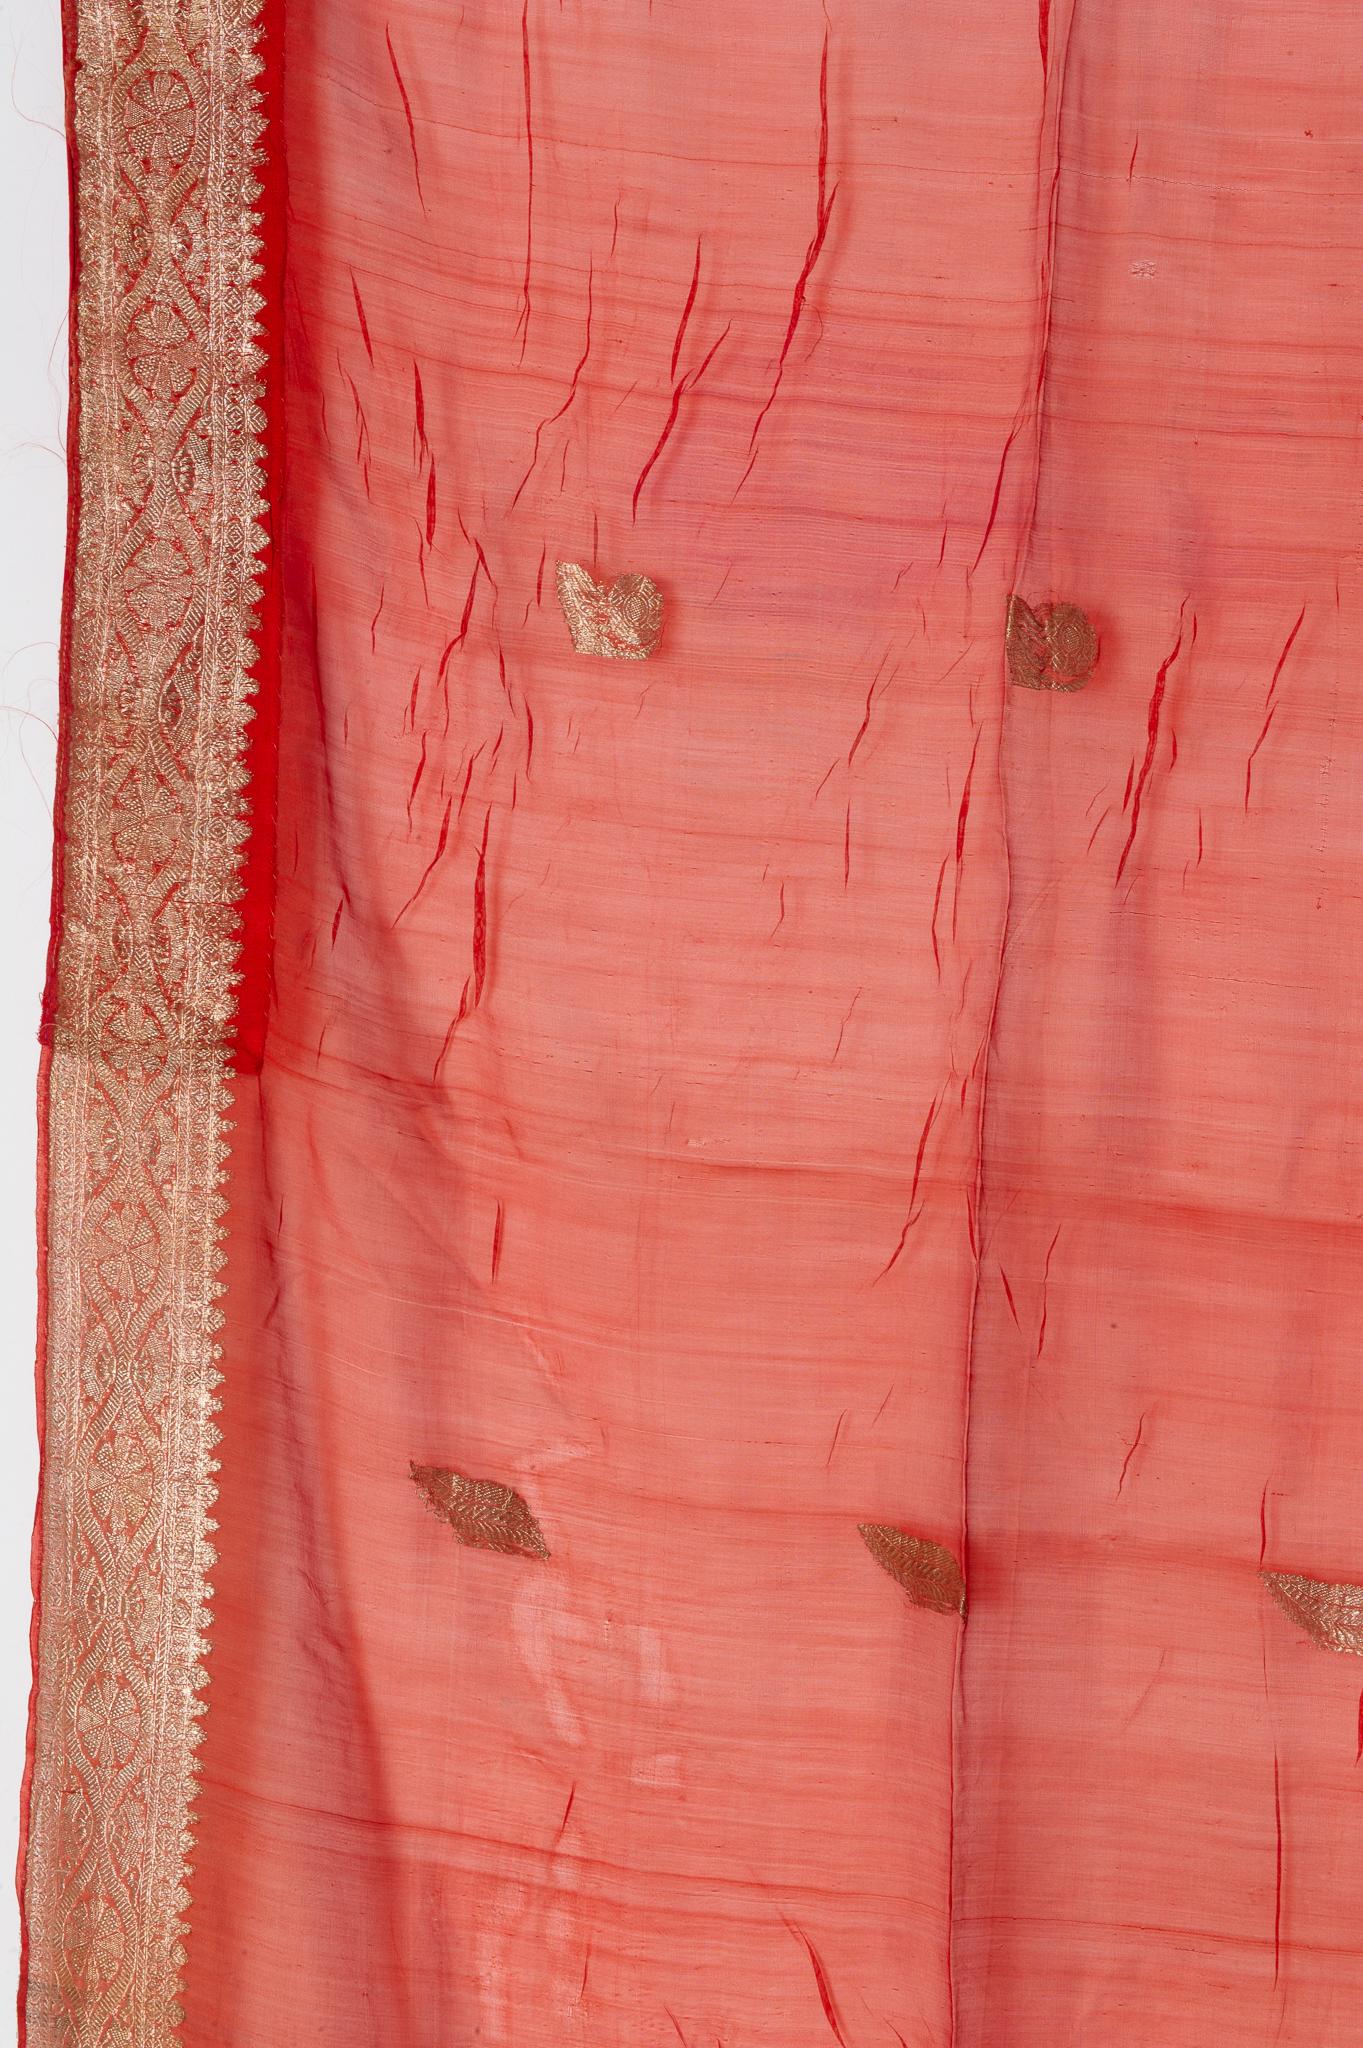  Indian Sari Coral Color New Idea for Unusual Curtains Also For Sale 6